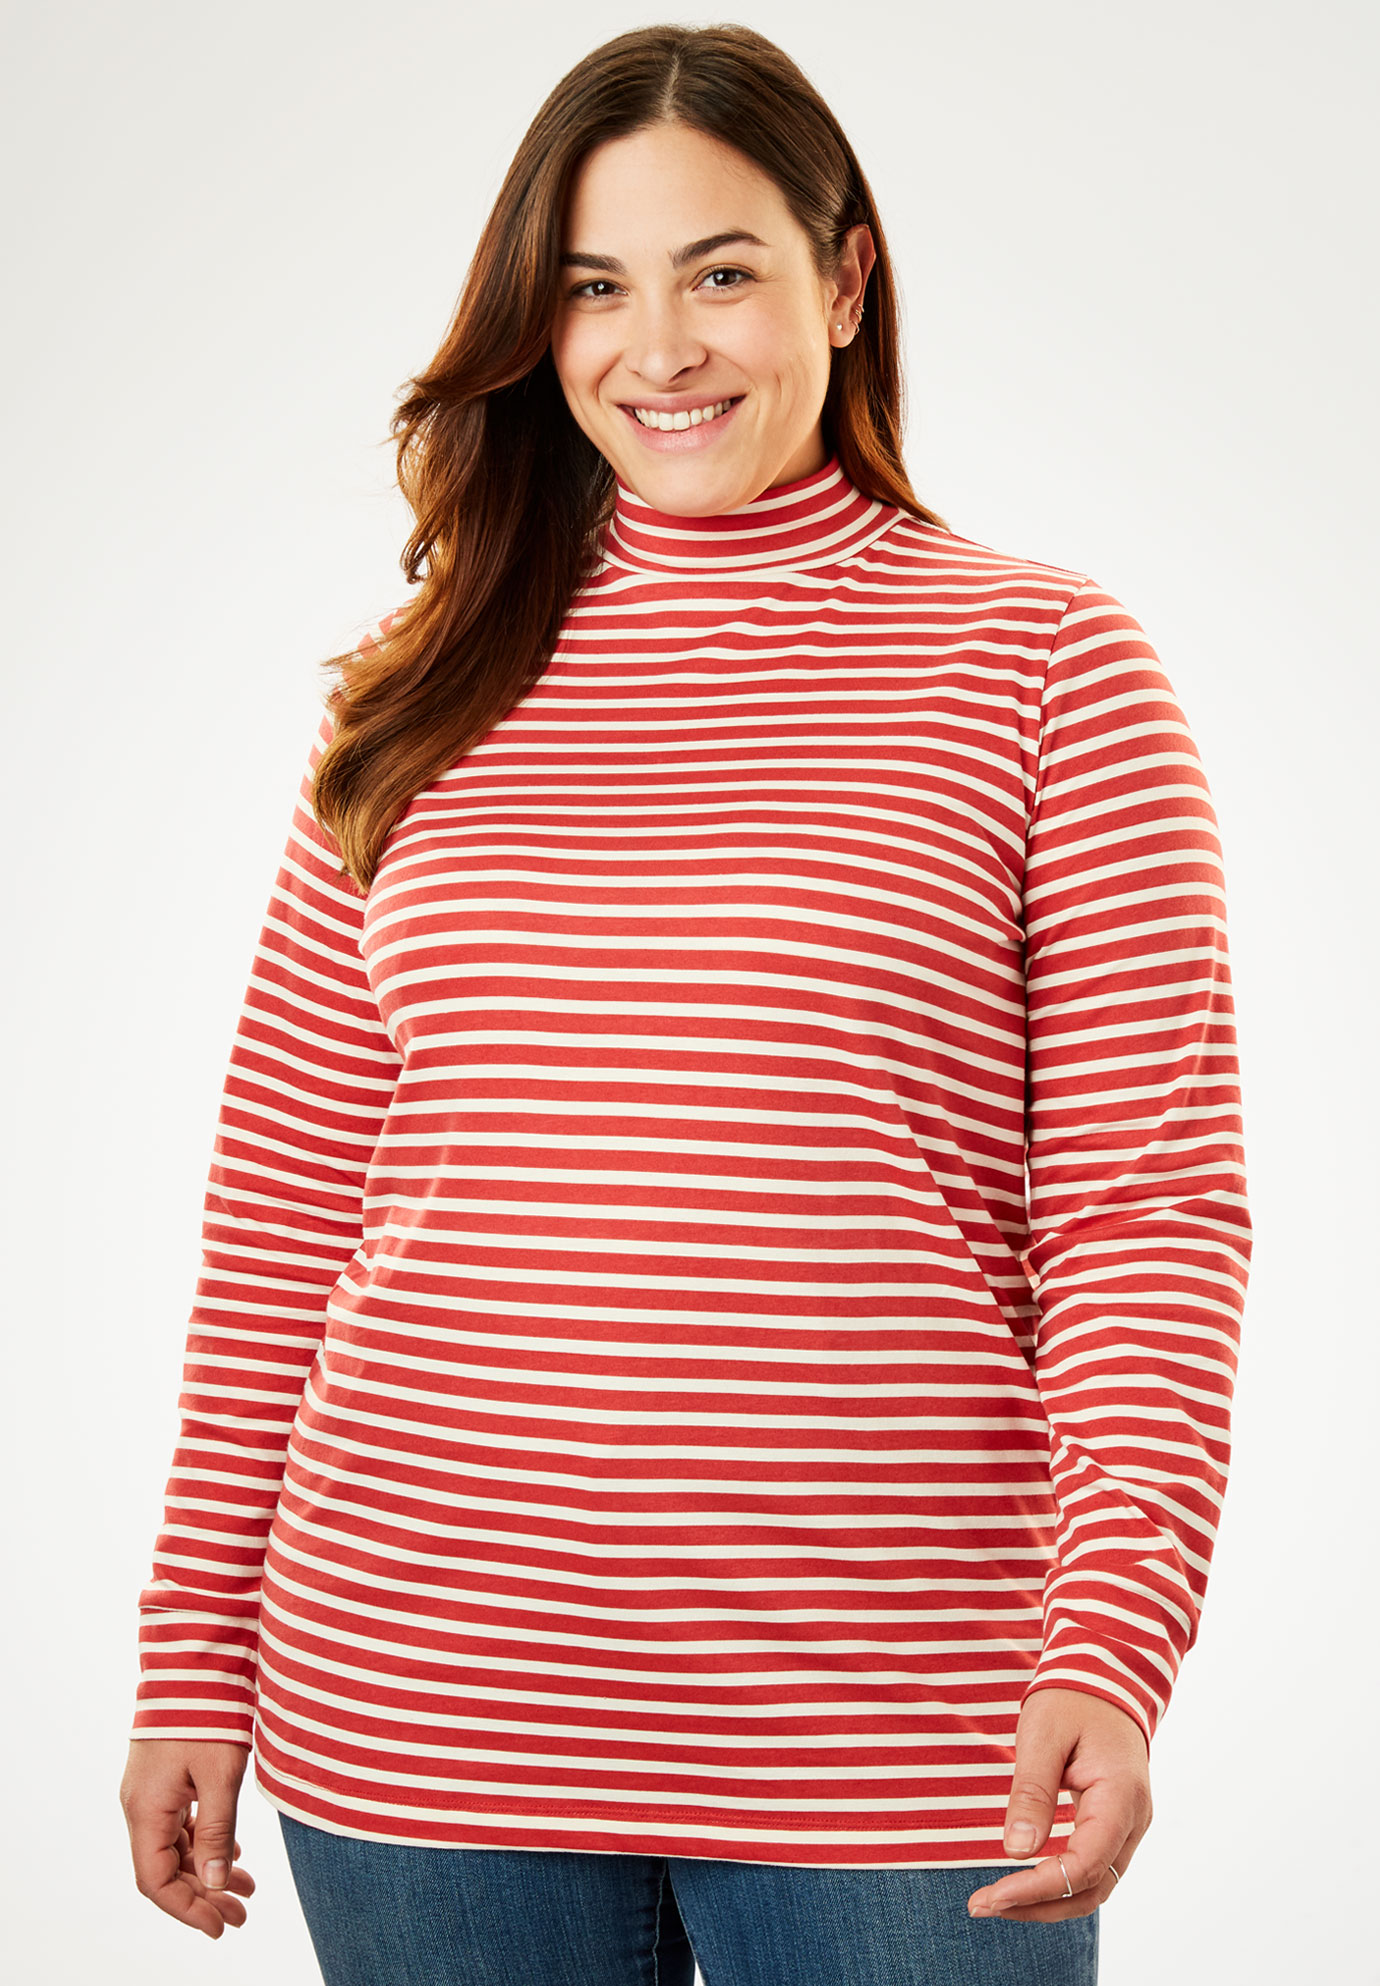 Perfect Printed Mock Turtleneck| Plus Size Tops | Woman Within